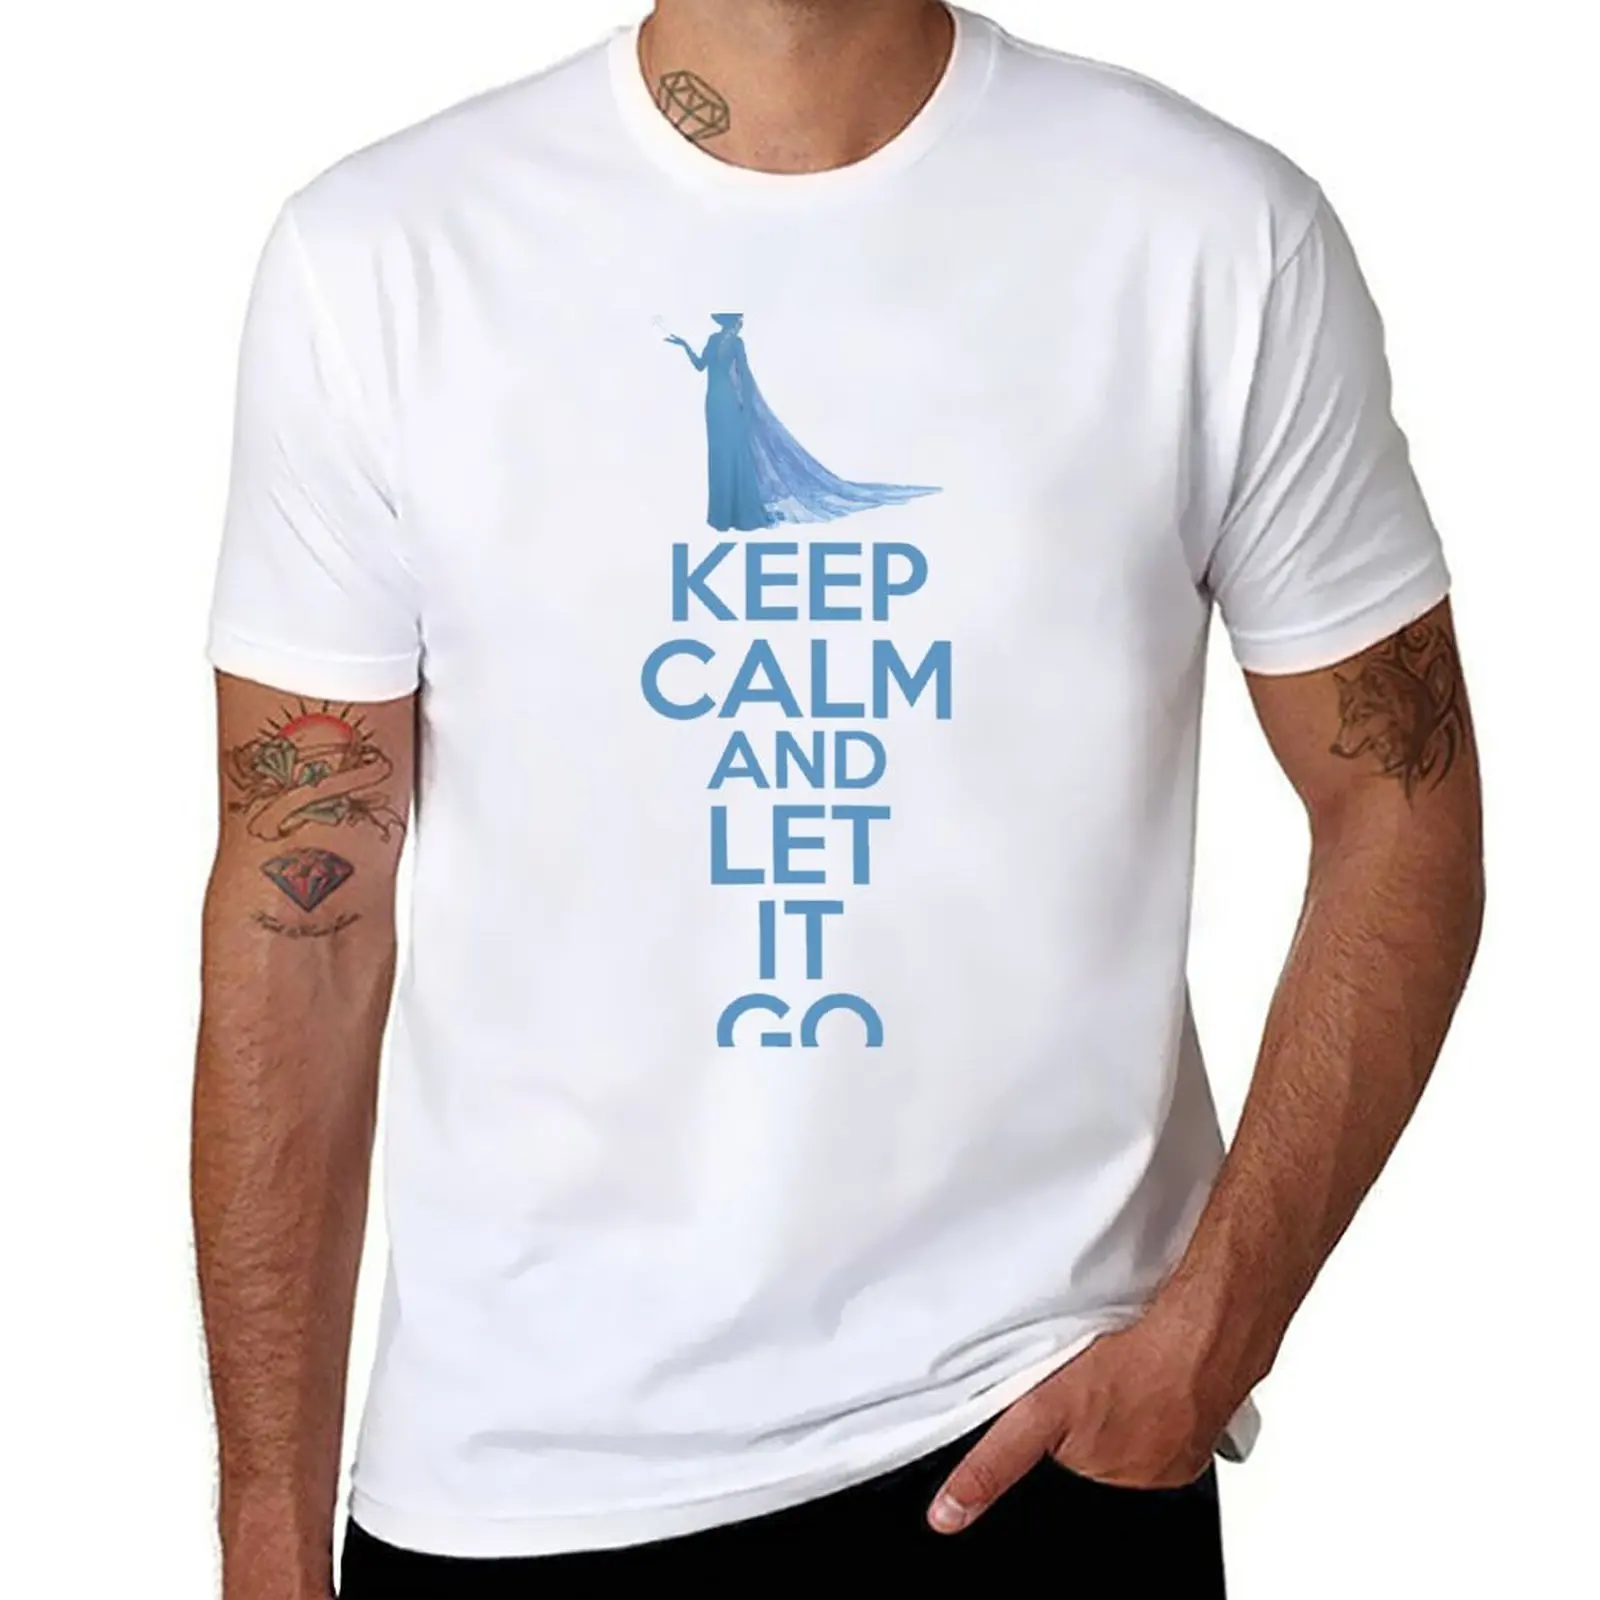 

Keep Calm and Let It Go T-Shirt kawaii clothes Short sleeve tee heavyweights Blouse t shirts for men graphic